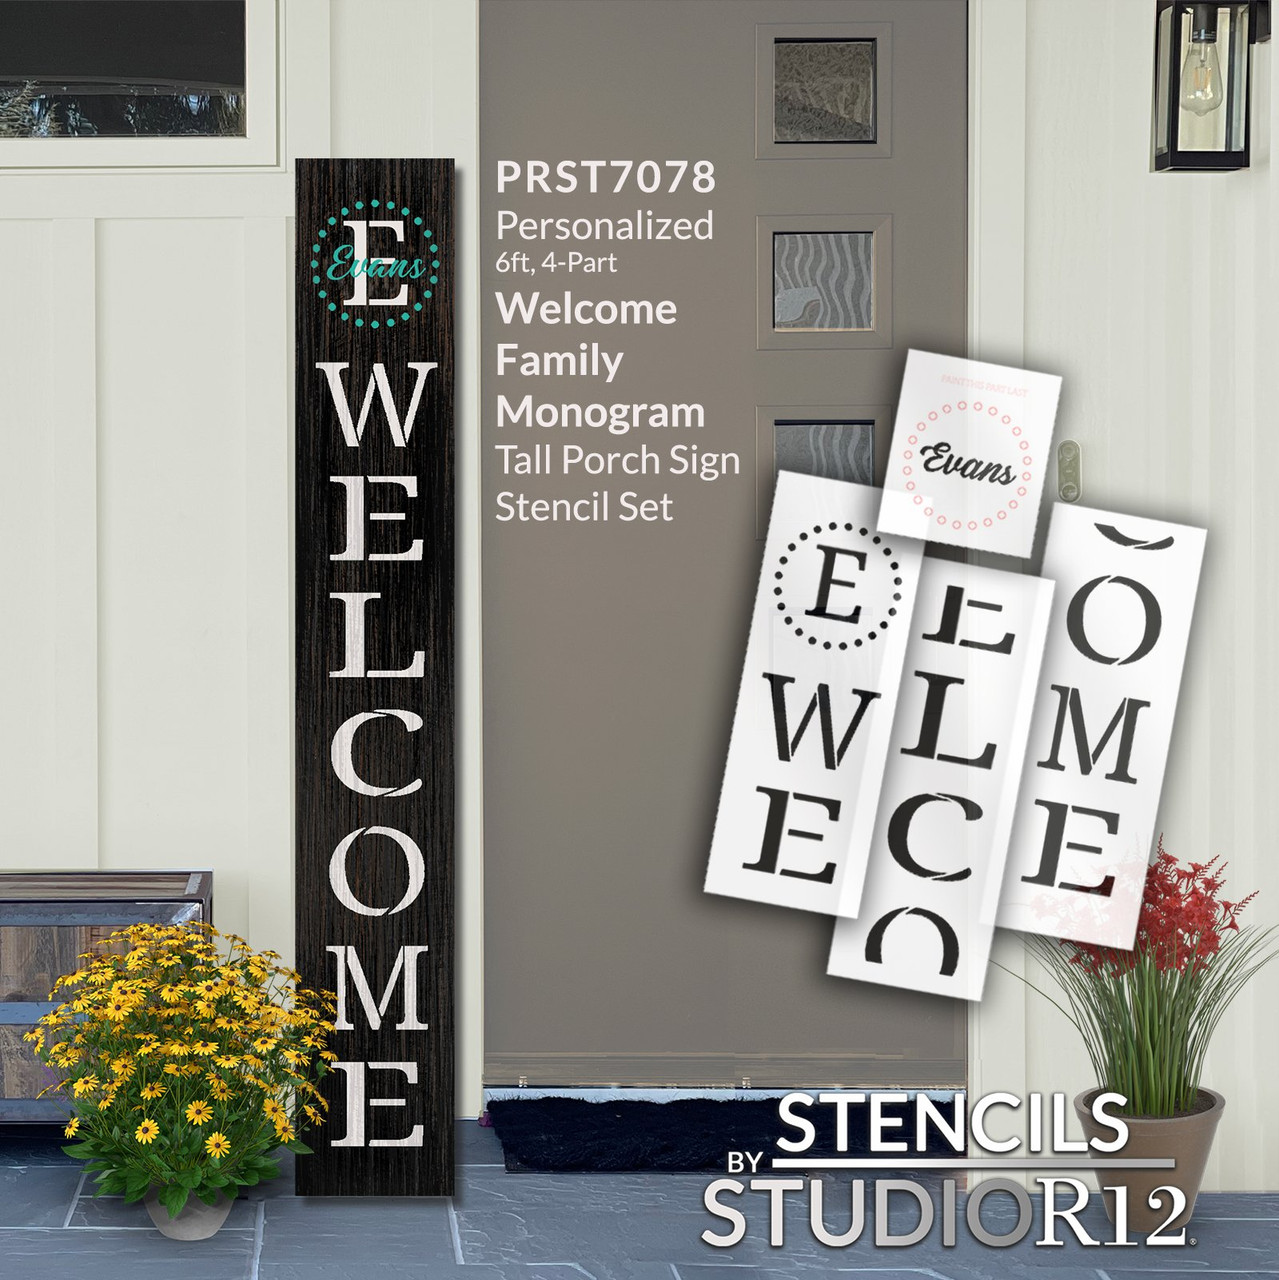 Personalized Welcome Tall Porch Sign Stencil with Monogram & Family Name by StudioR12 - Select Size - USA Made - Reusable Custom Vertical Leaner Template for DIY Outdoor Decor - PRST7078